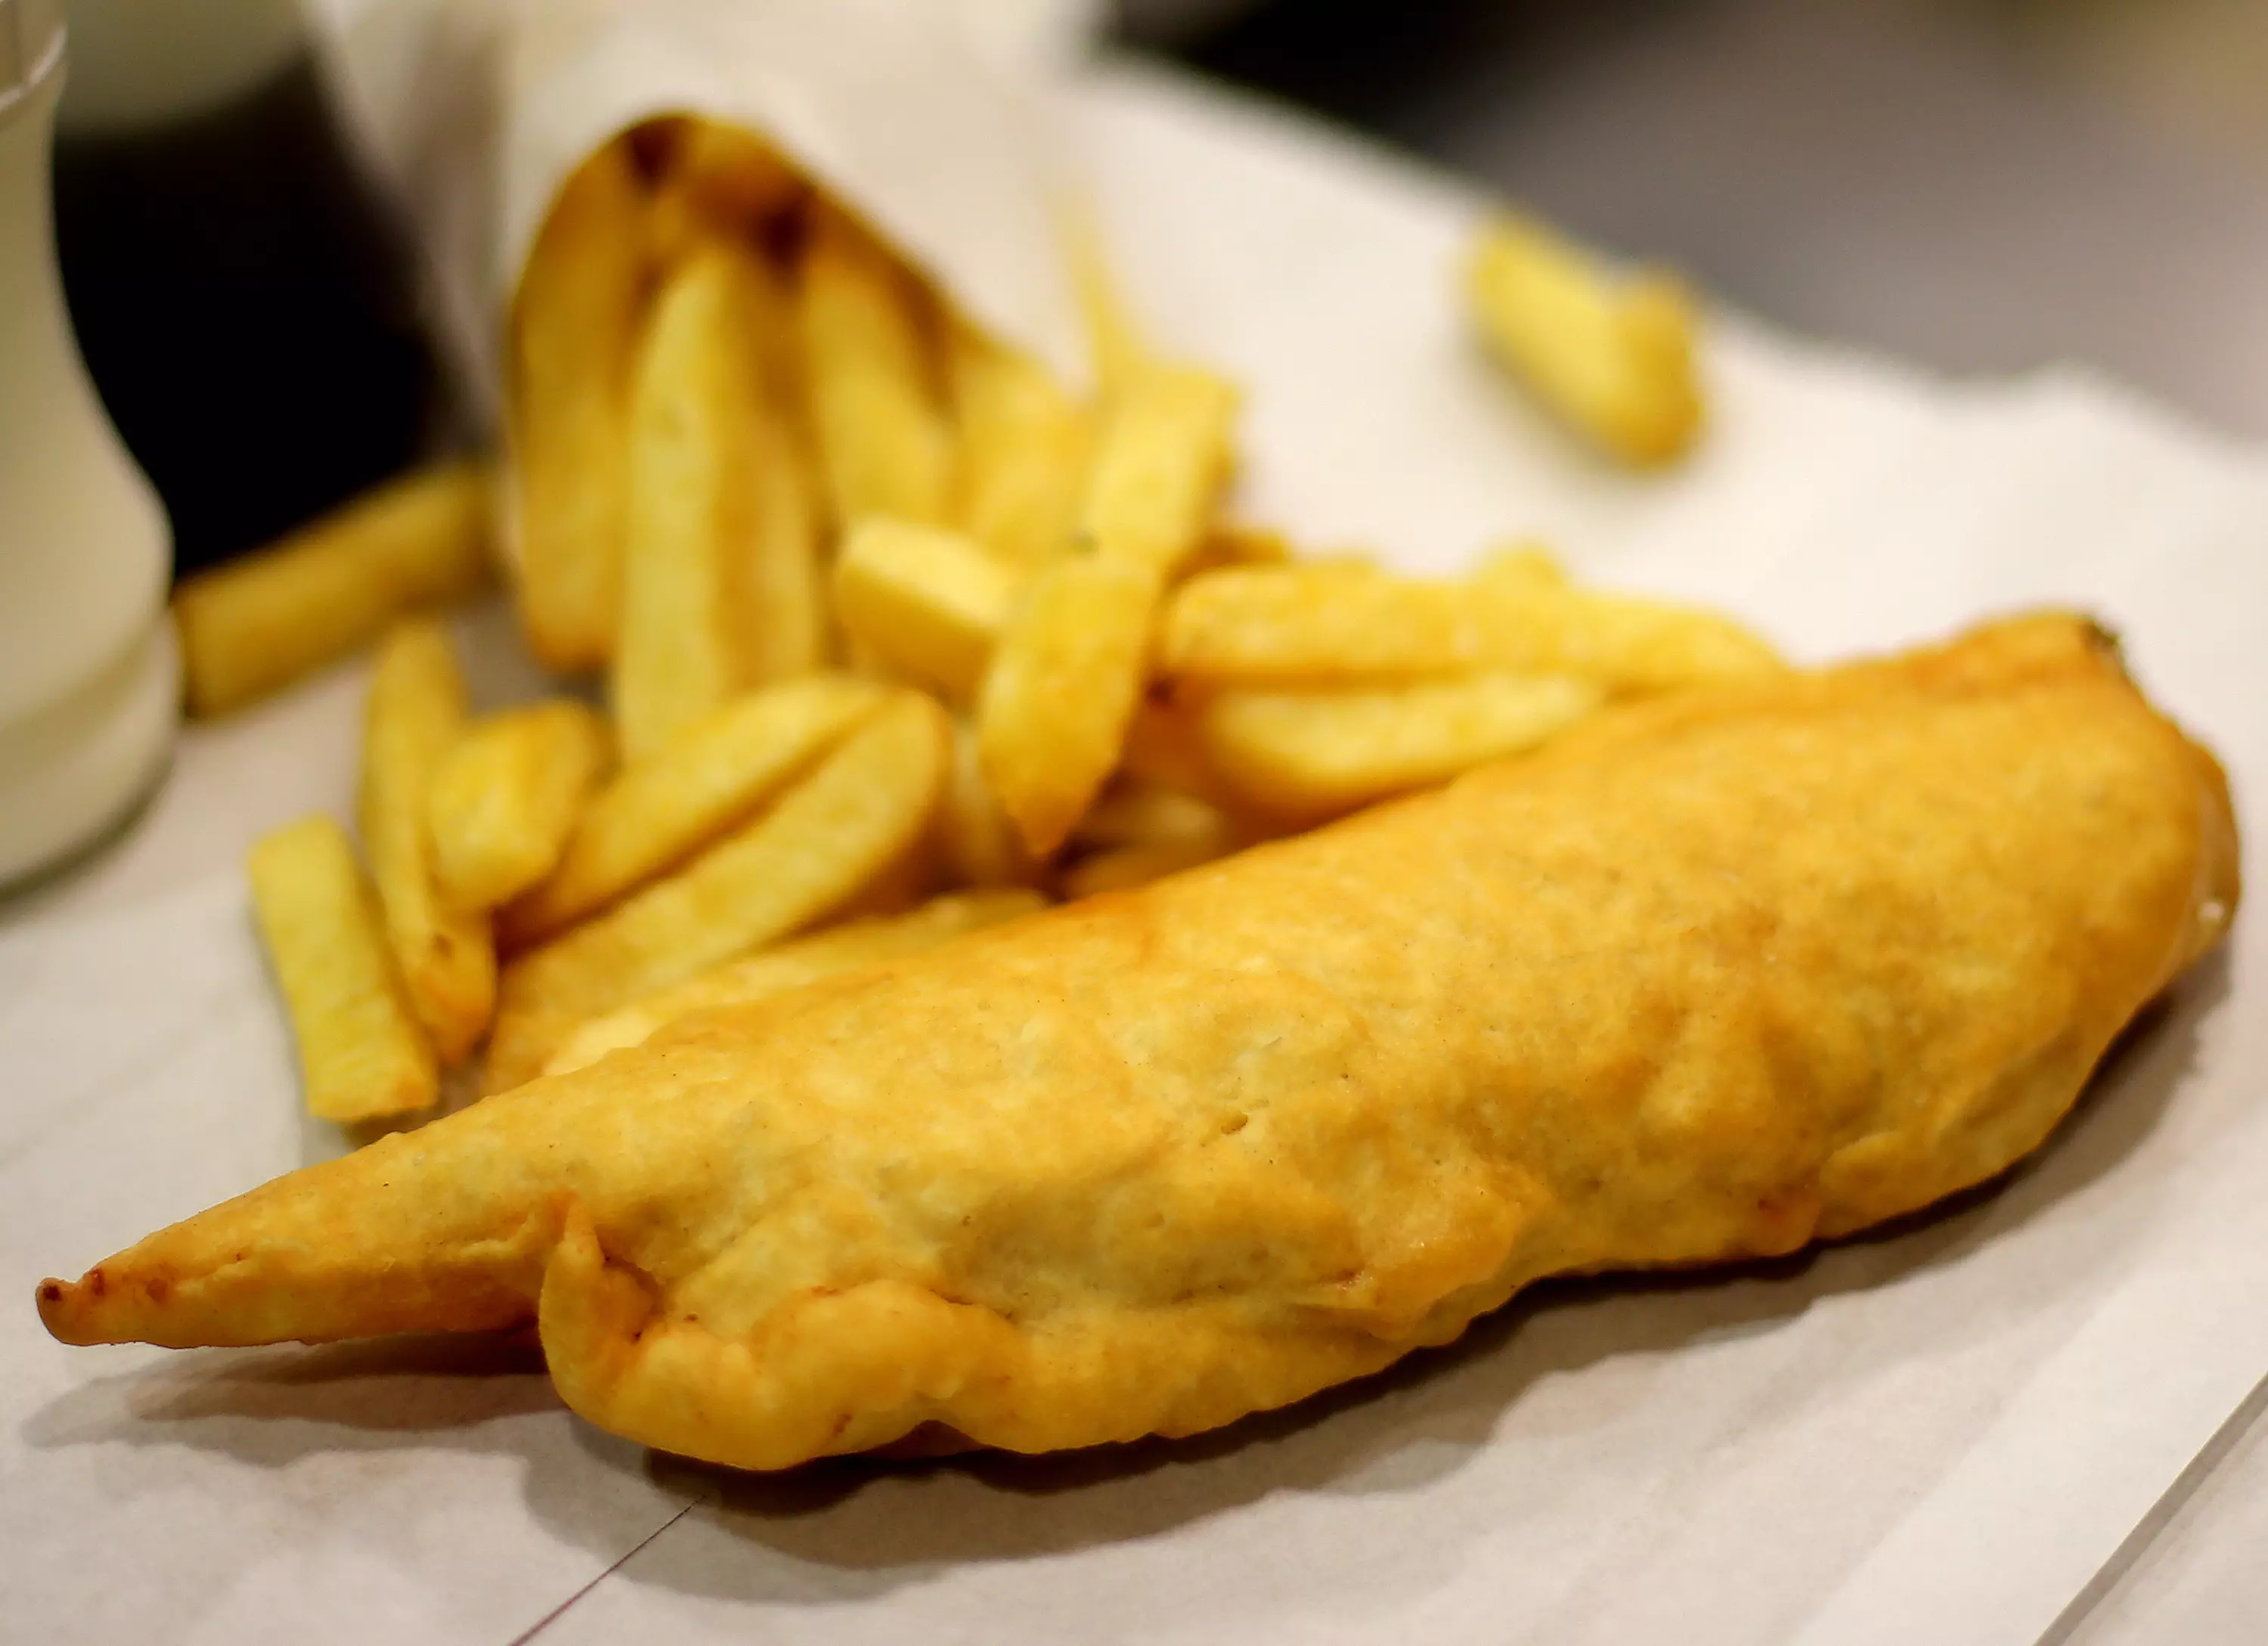 A Woman Asked A Chippy To Bring Her Flu Tablets With Her Order